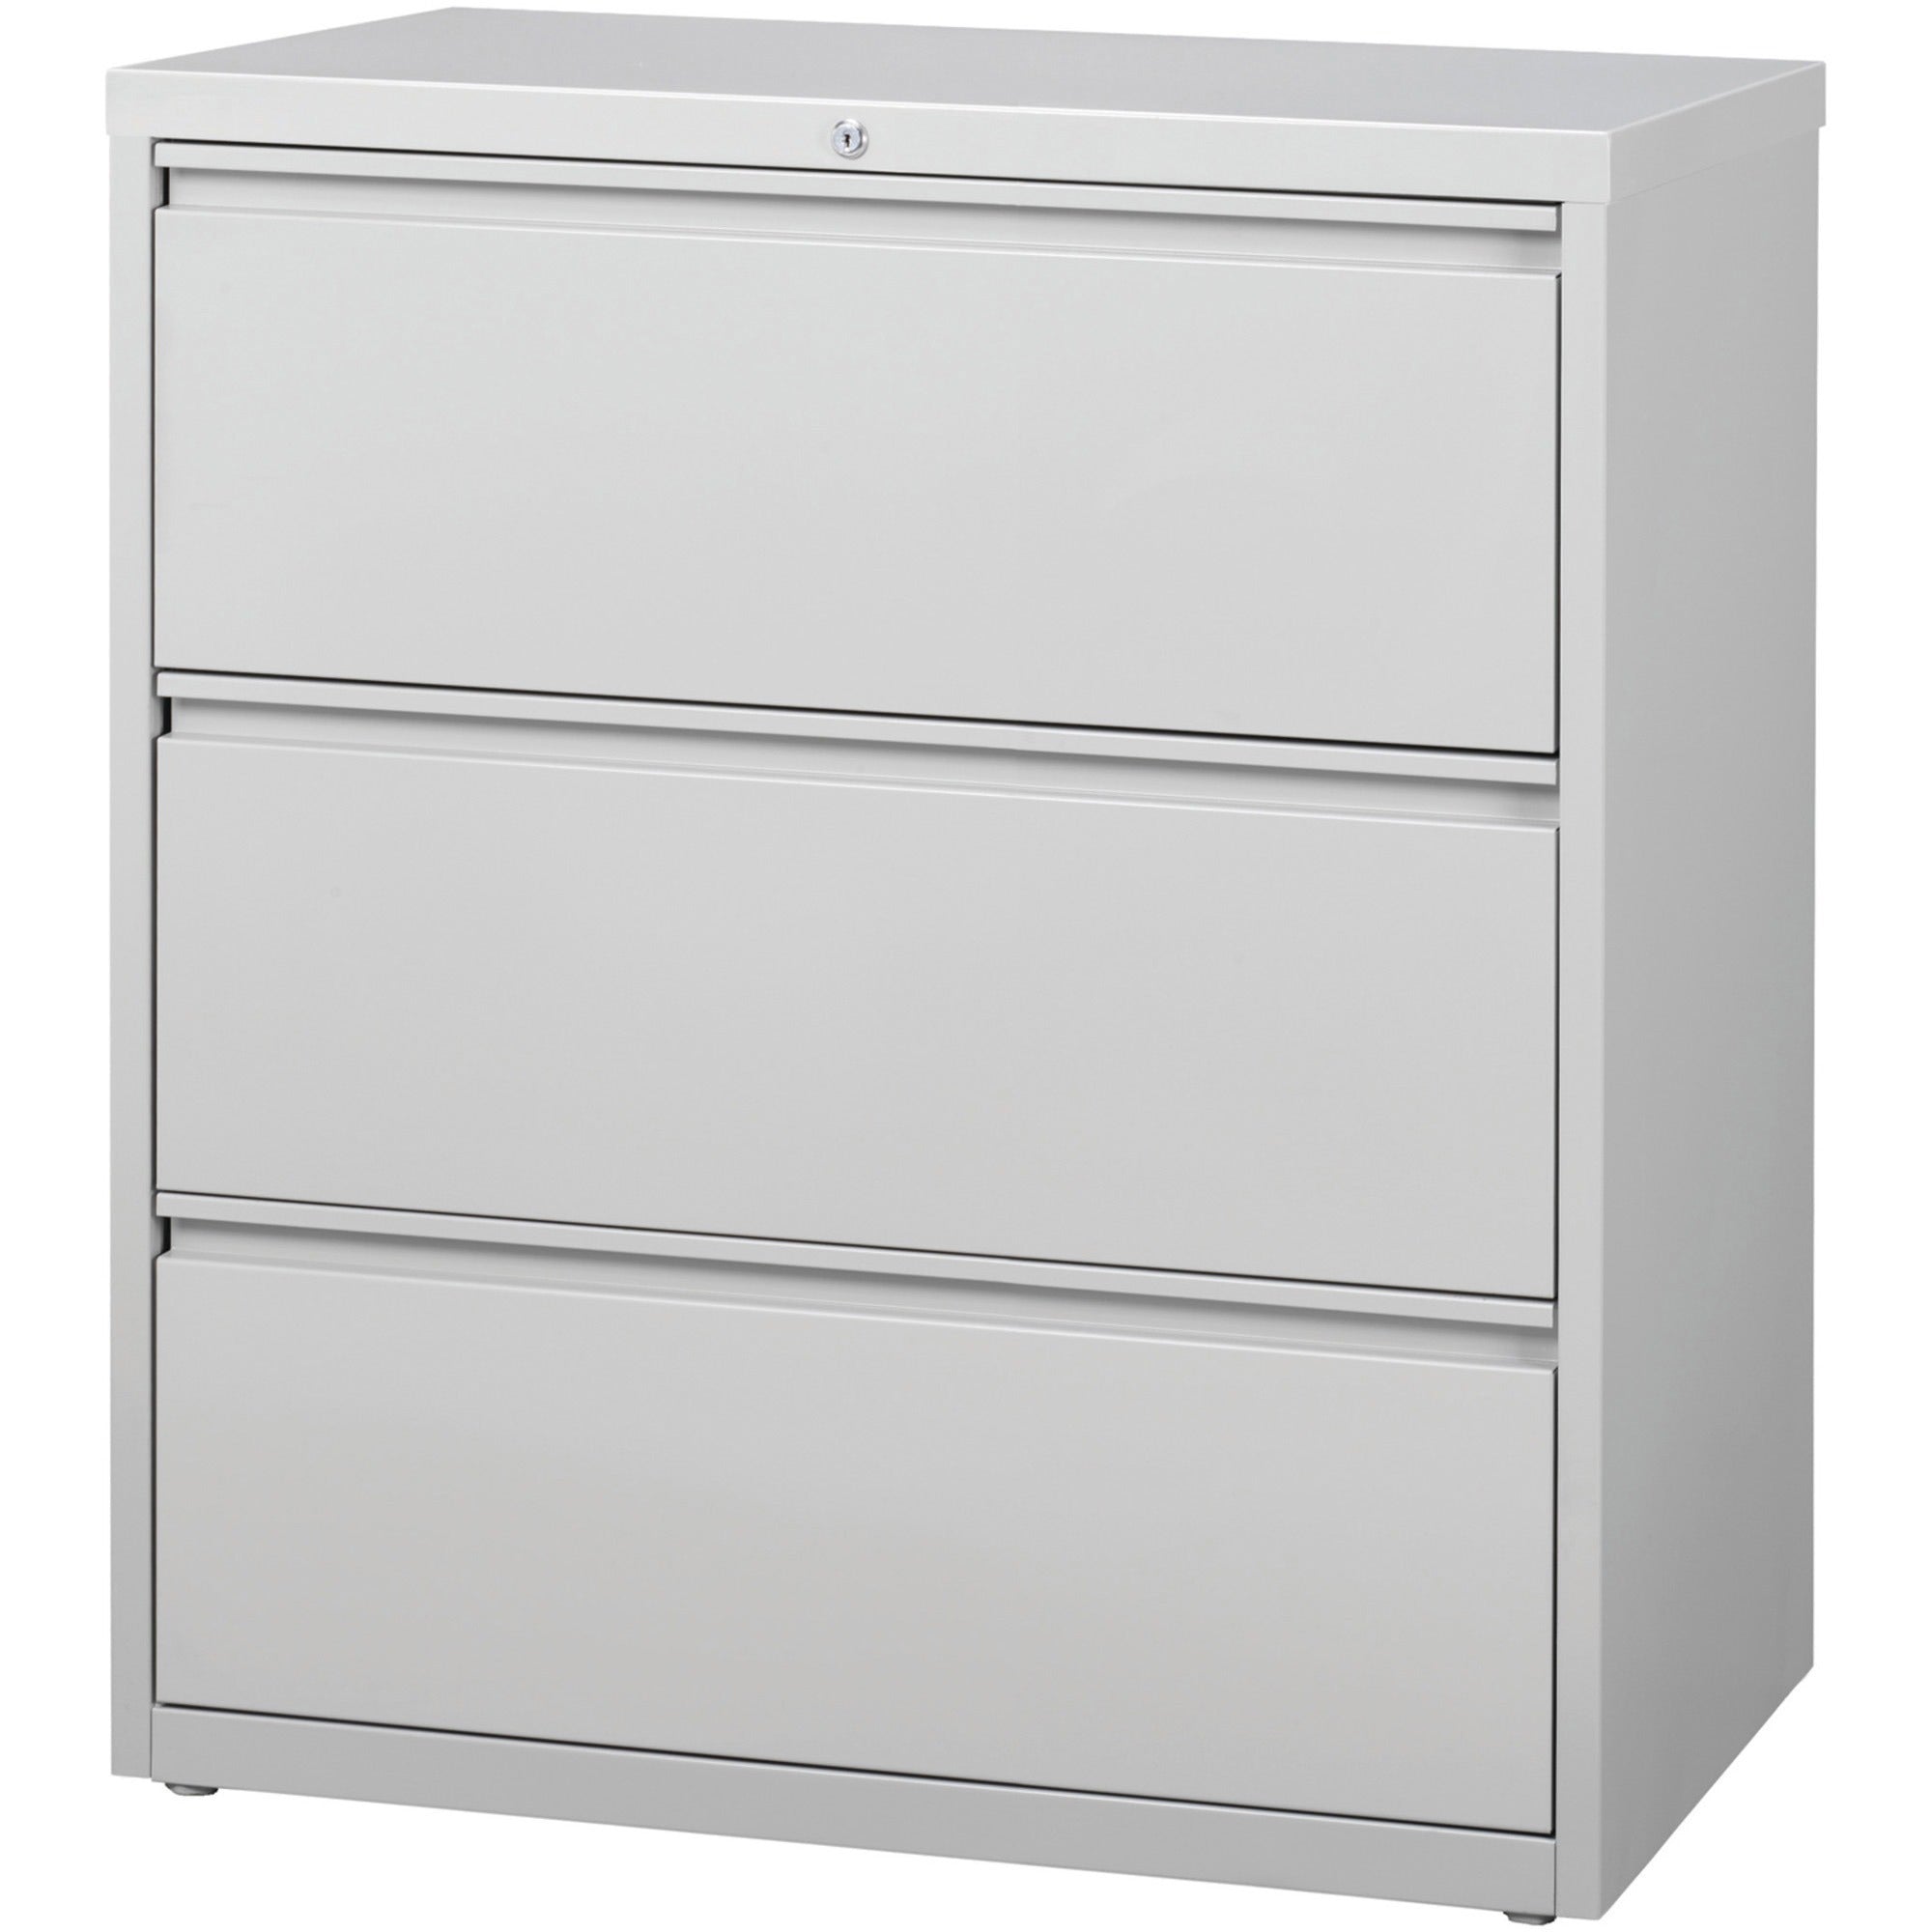 Lorell Fortress Series Lateral File - 36" x 18.6" x 40.3" - 3 x Drawer(s) for File - Letter, Legal, A4 - Lateral - Locking Drawer, Magnetic Label Holder, Ball-bearing Suspension, Leveling Glide, Locking Bar, Hanging Rail - Light Gray - Steel - Recycl - 